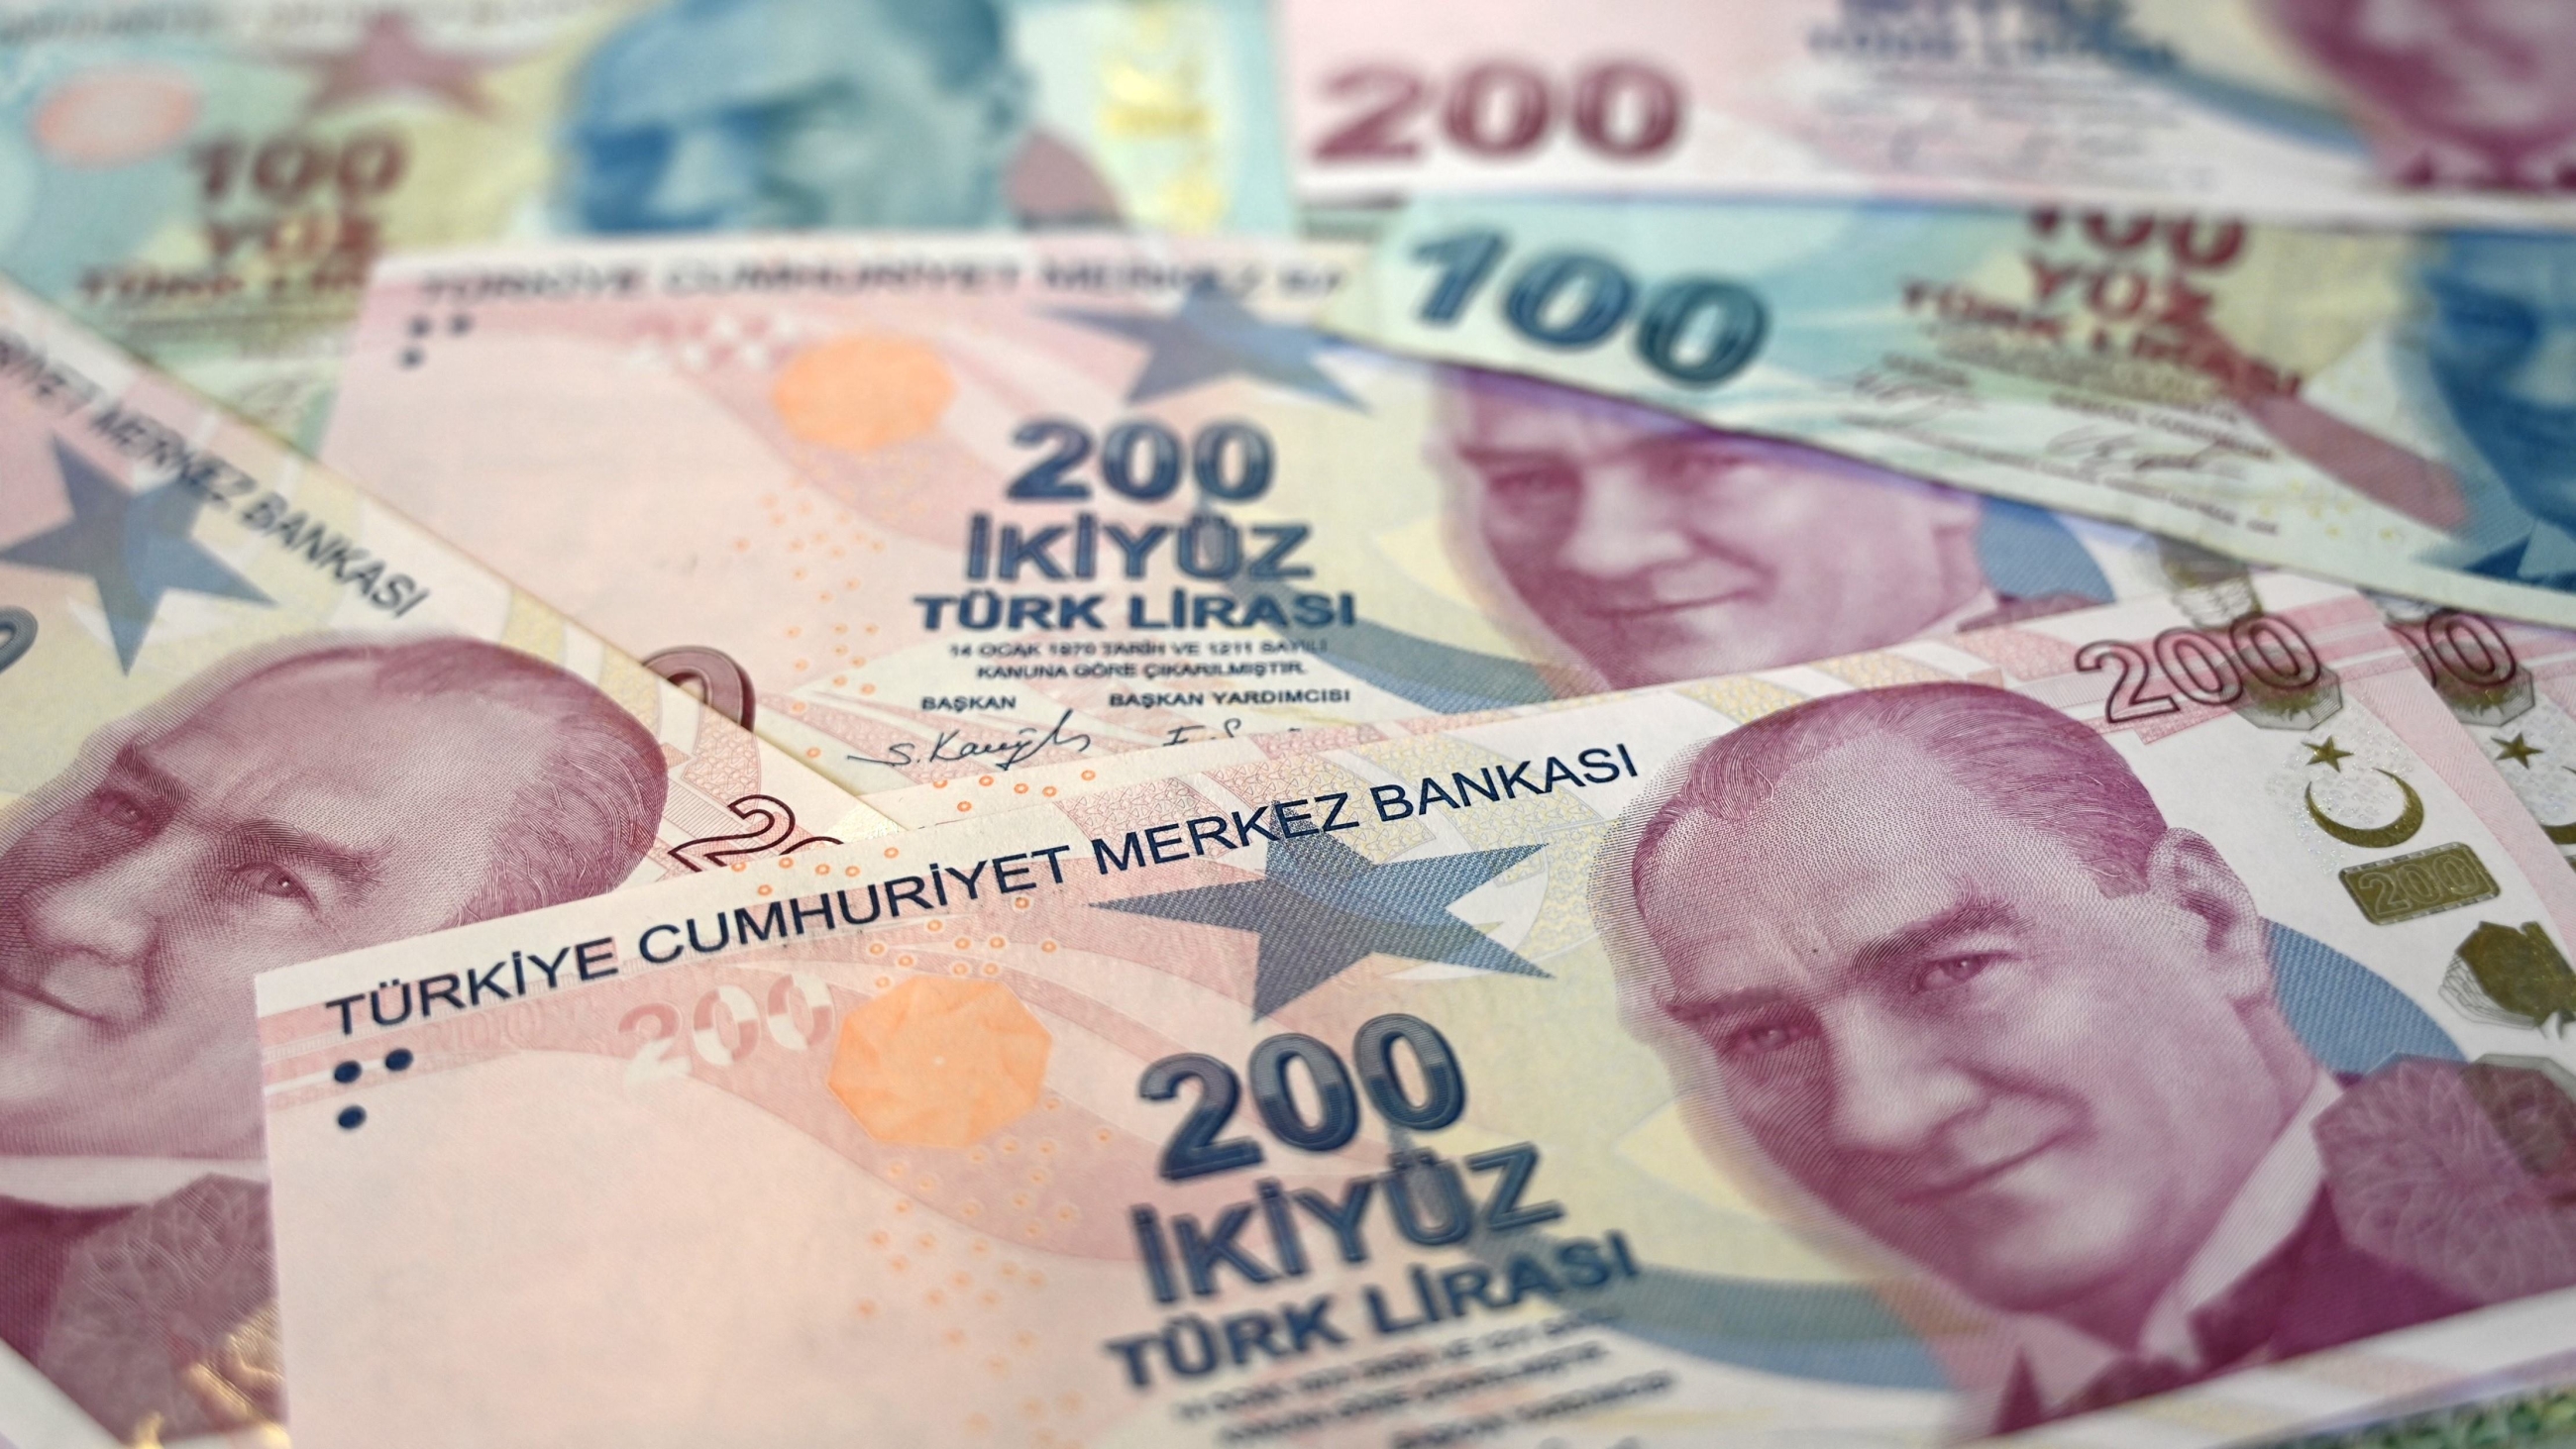 The lira's depreciating value has been one consequence of Turkey's economic woes